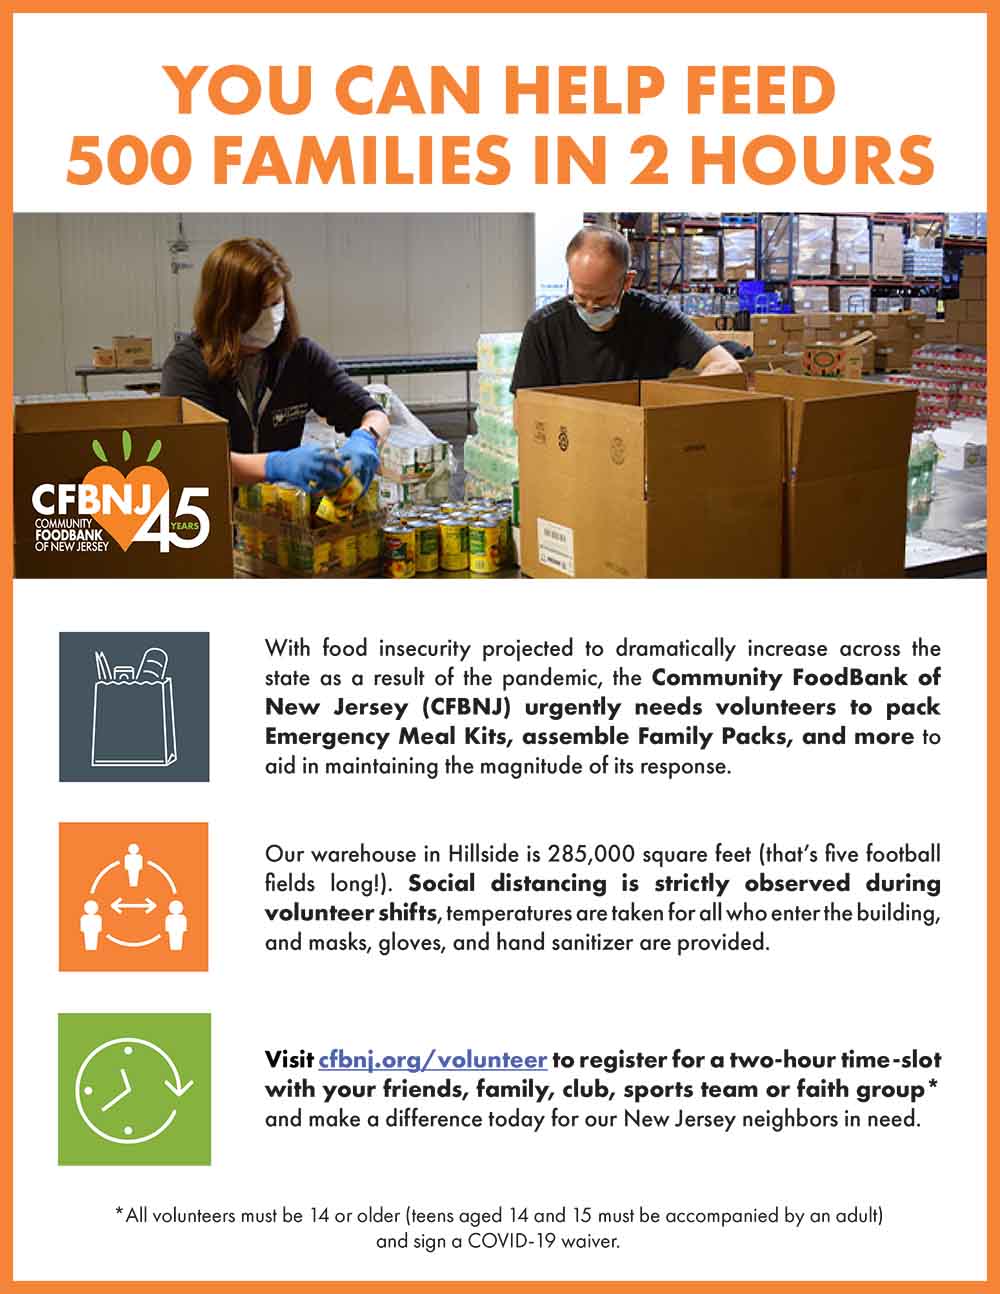 YOU CAN HELP FEED 500 FAMILIES IN 2 HOURS - Link - https://www.state.nj.us/state/assets/pdf/volunteer/wfh-volunteer-flyer.pdf